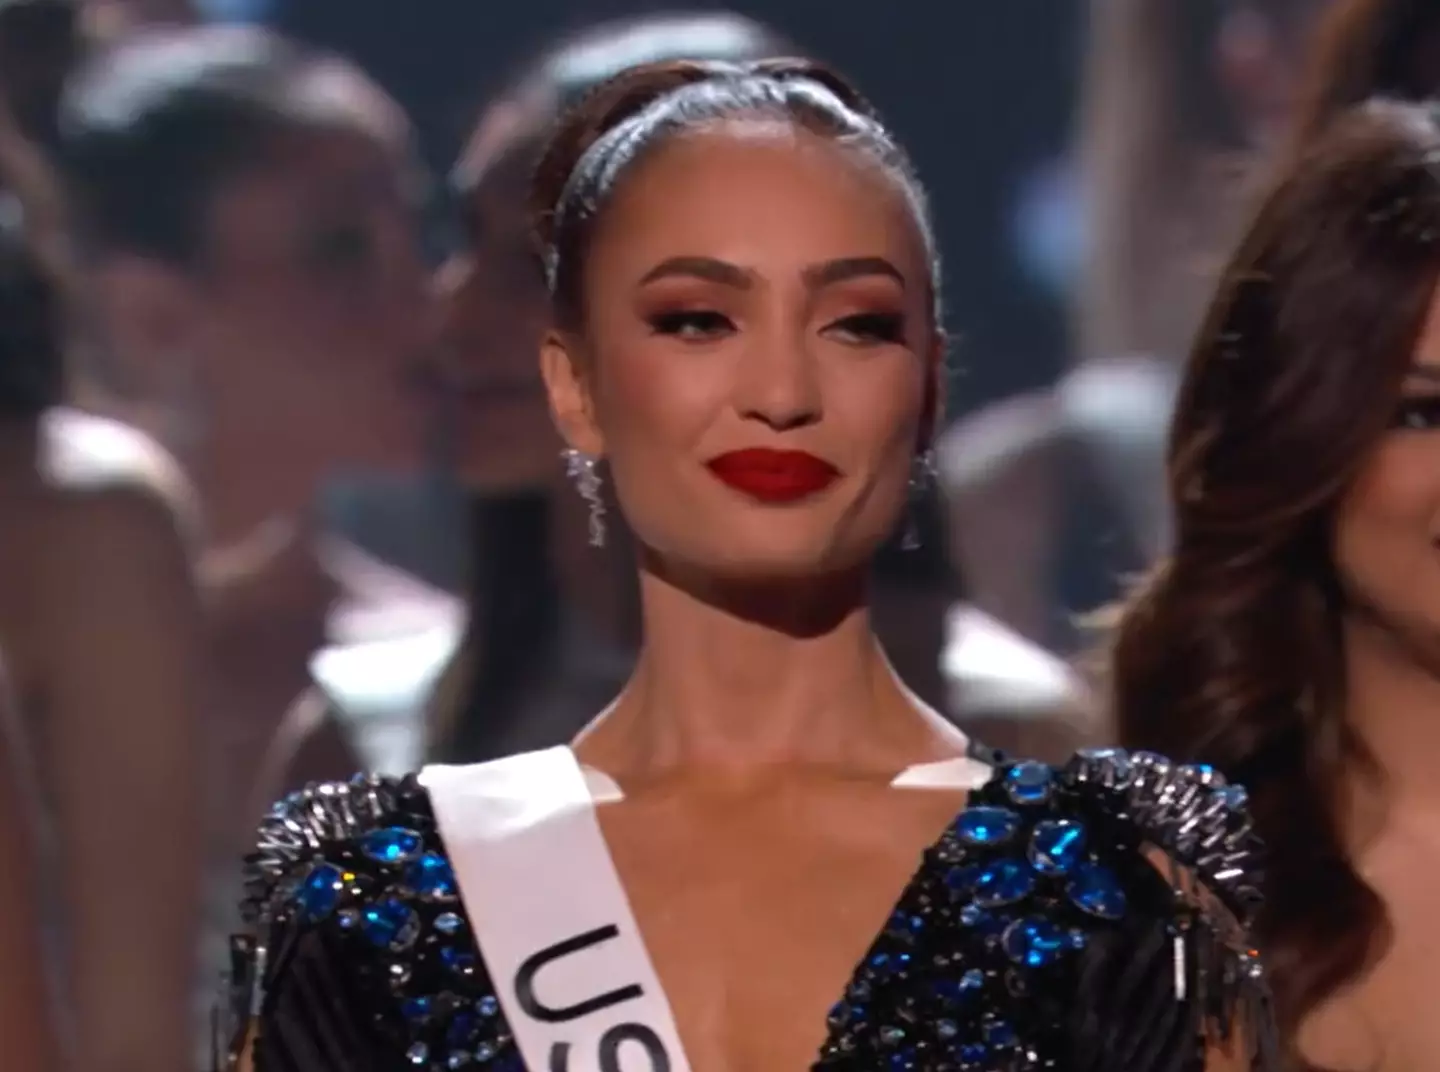 Some people reckon Miss USA and Miss Universe having the same owner, along with the competition being held in the USA meant it was rigged.